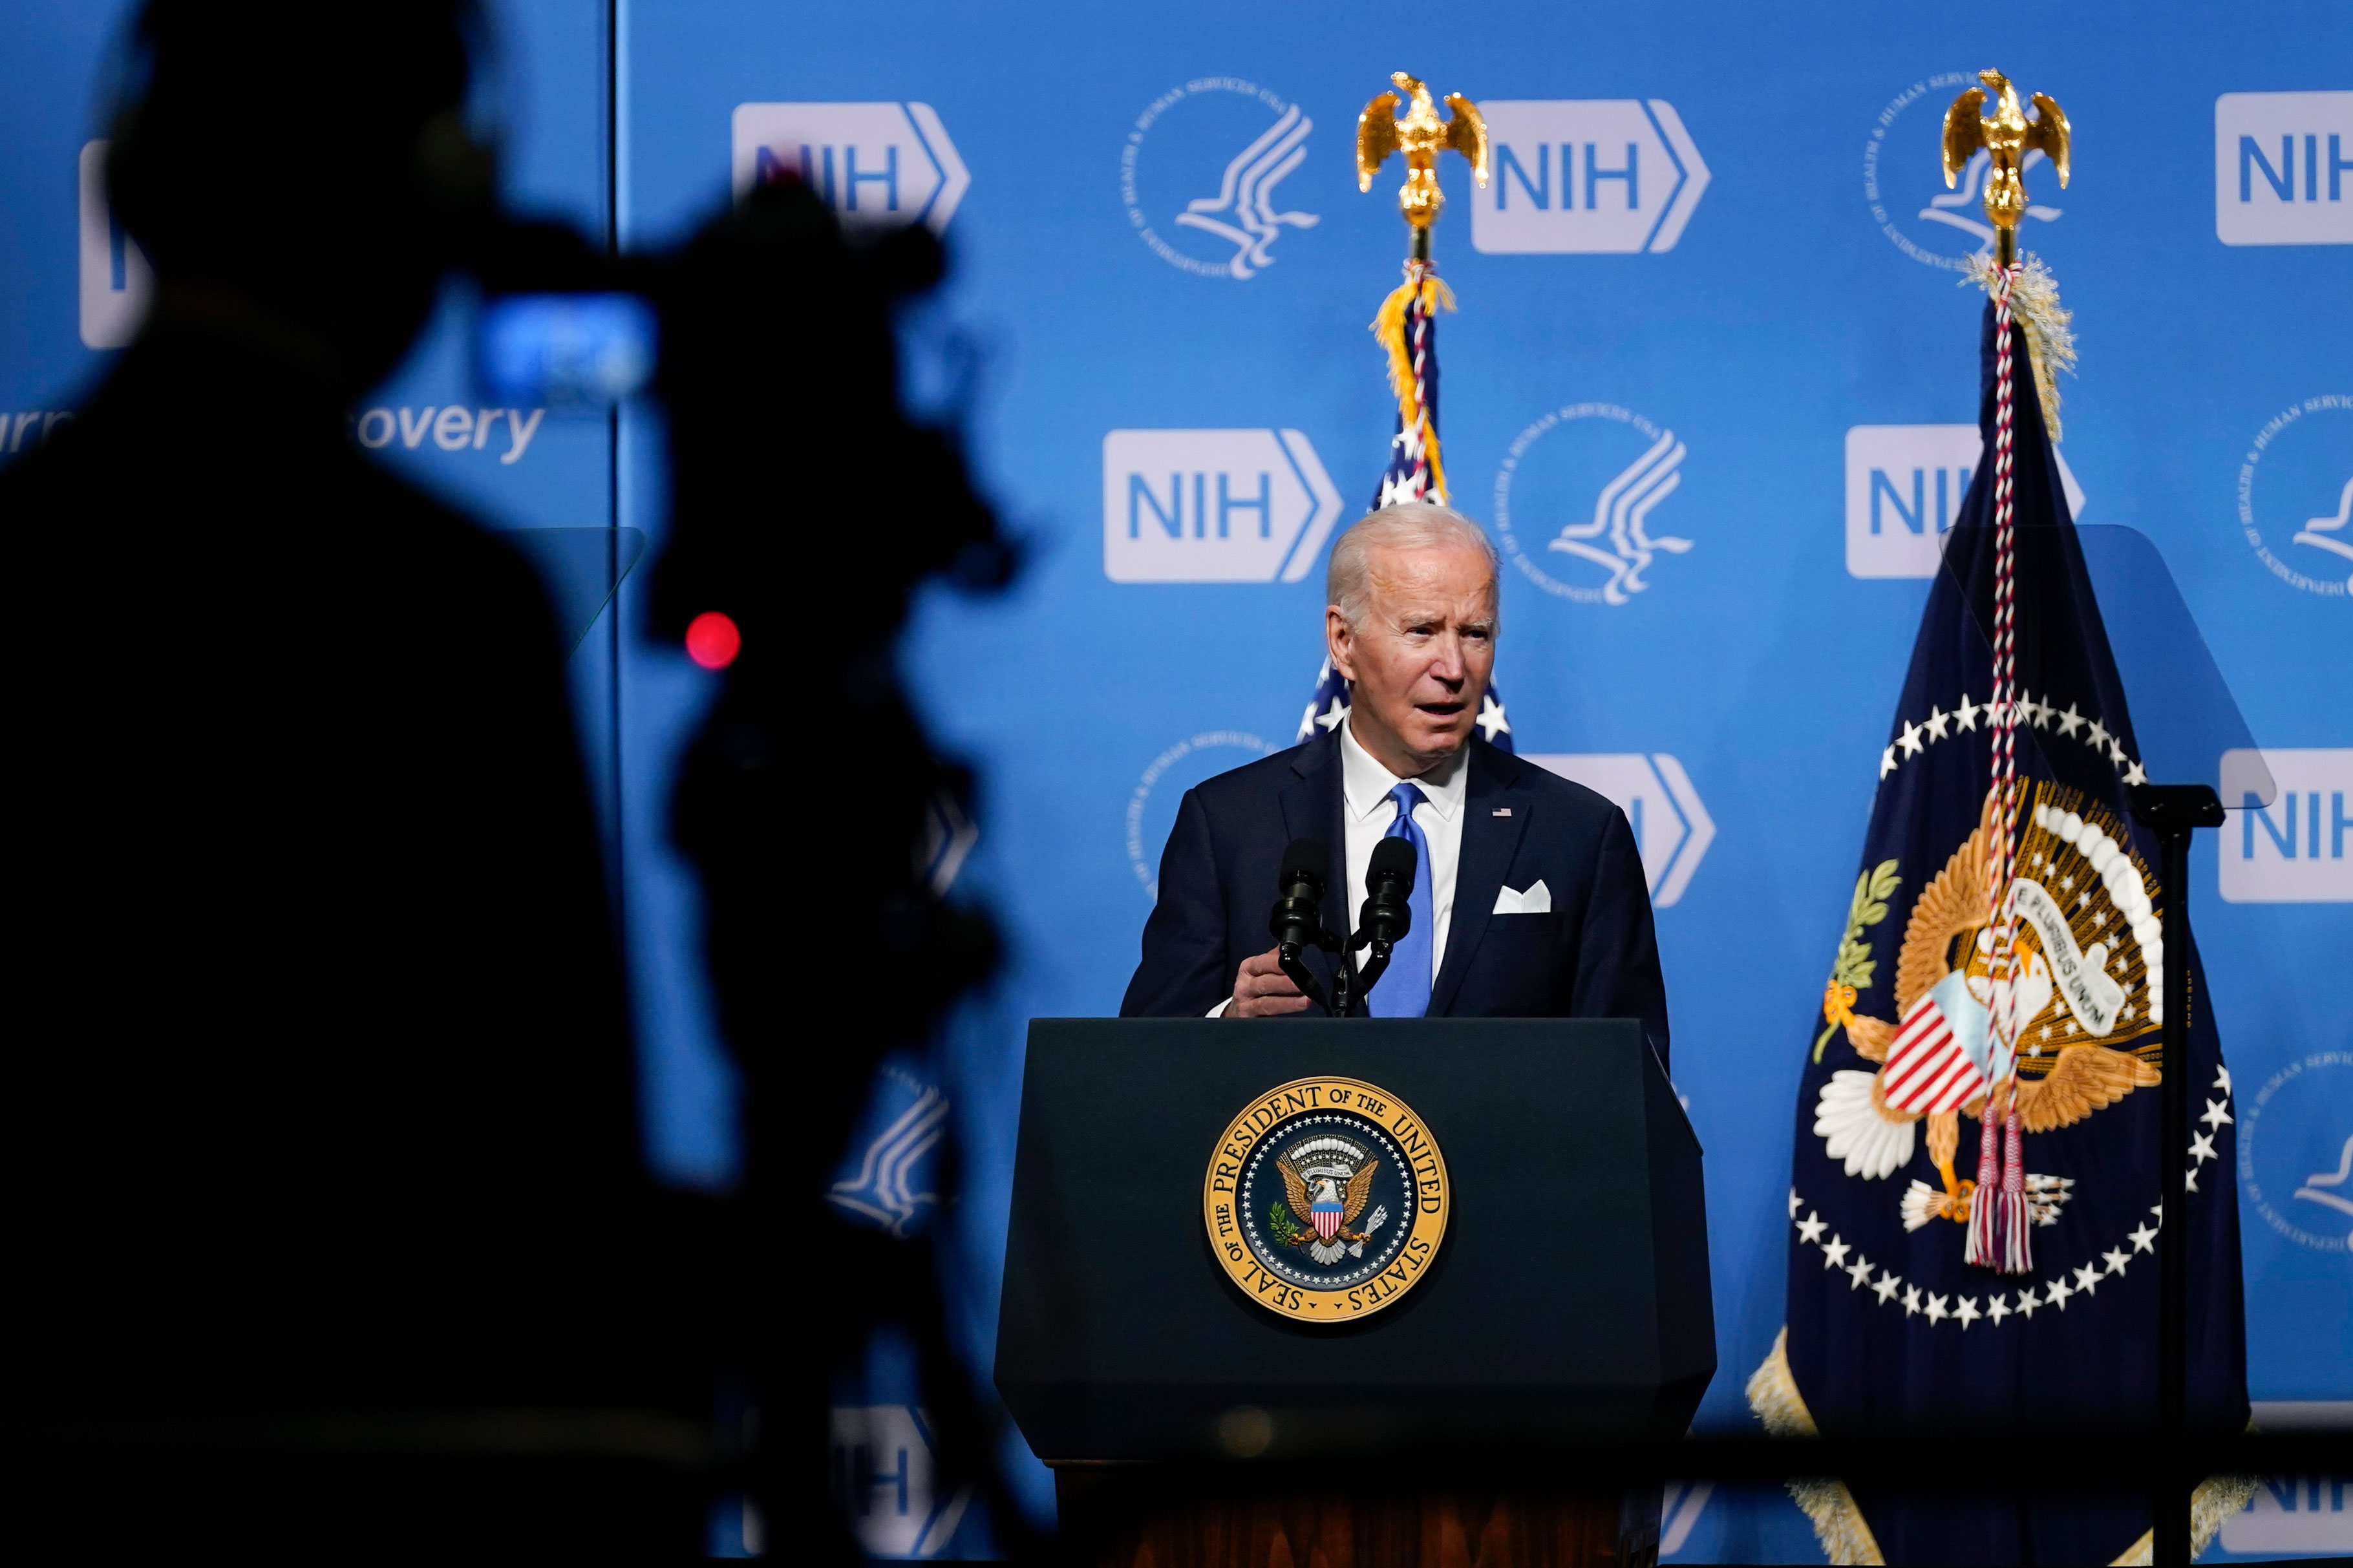 President Joe Biden speaks about the COVID-19 variant named omicron during a visit to the National Institutes of Health, Thursday, Dec. 2, 2021